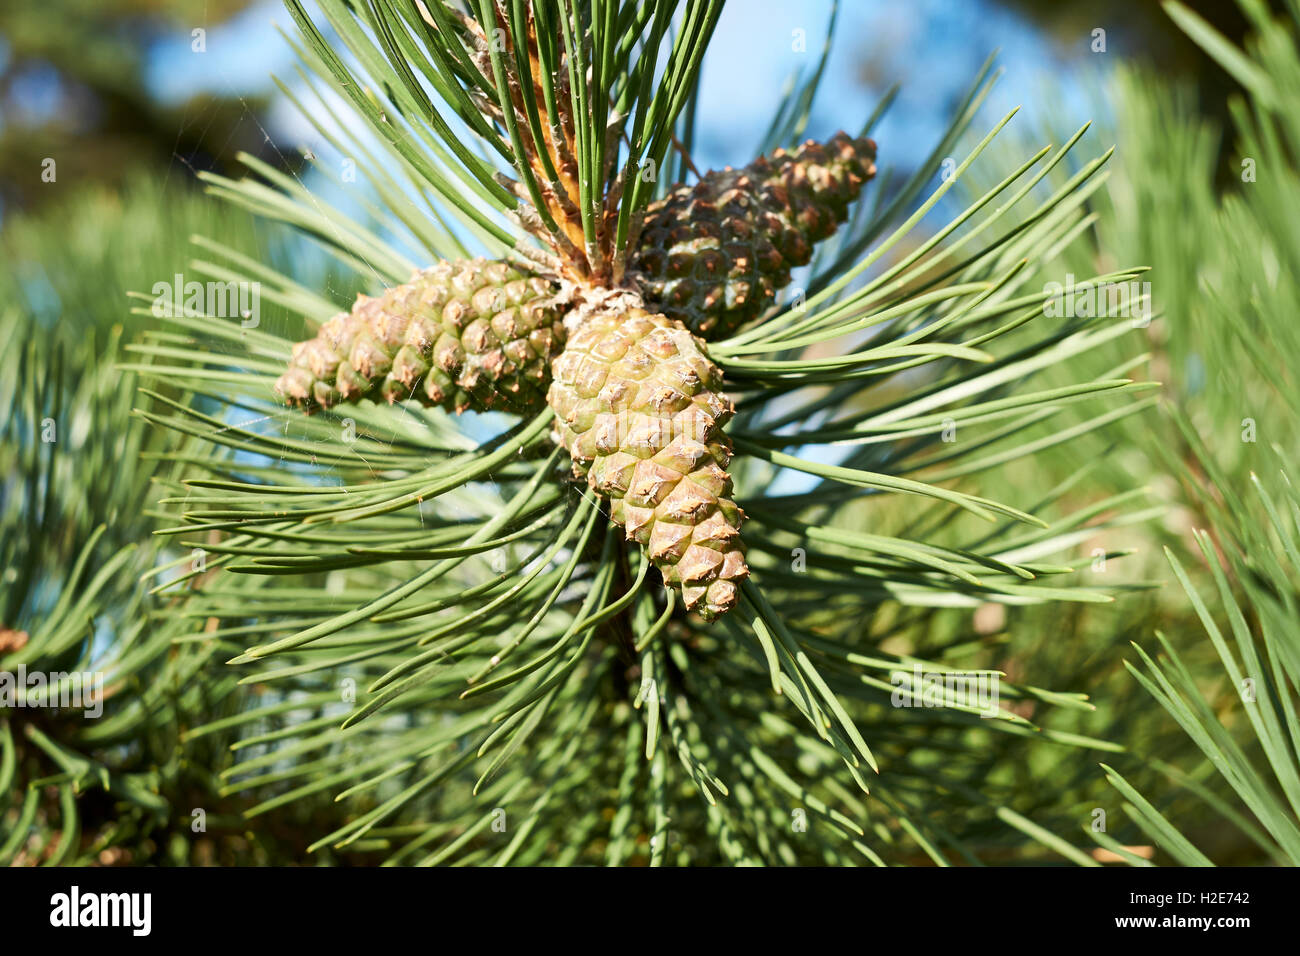 Large Pine Stem with Mixed Pinecones | A Cottage in The City